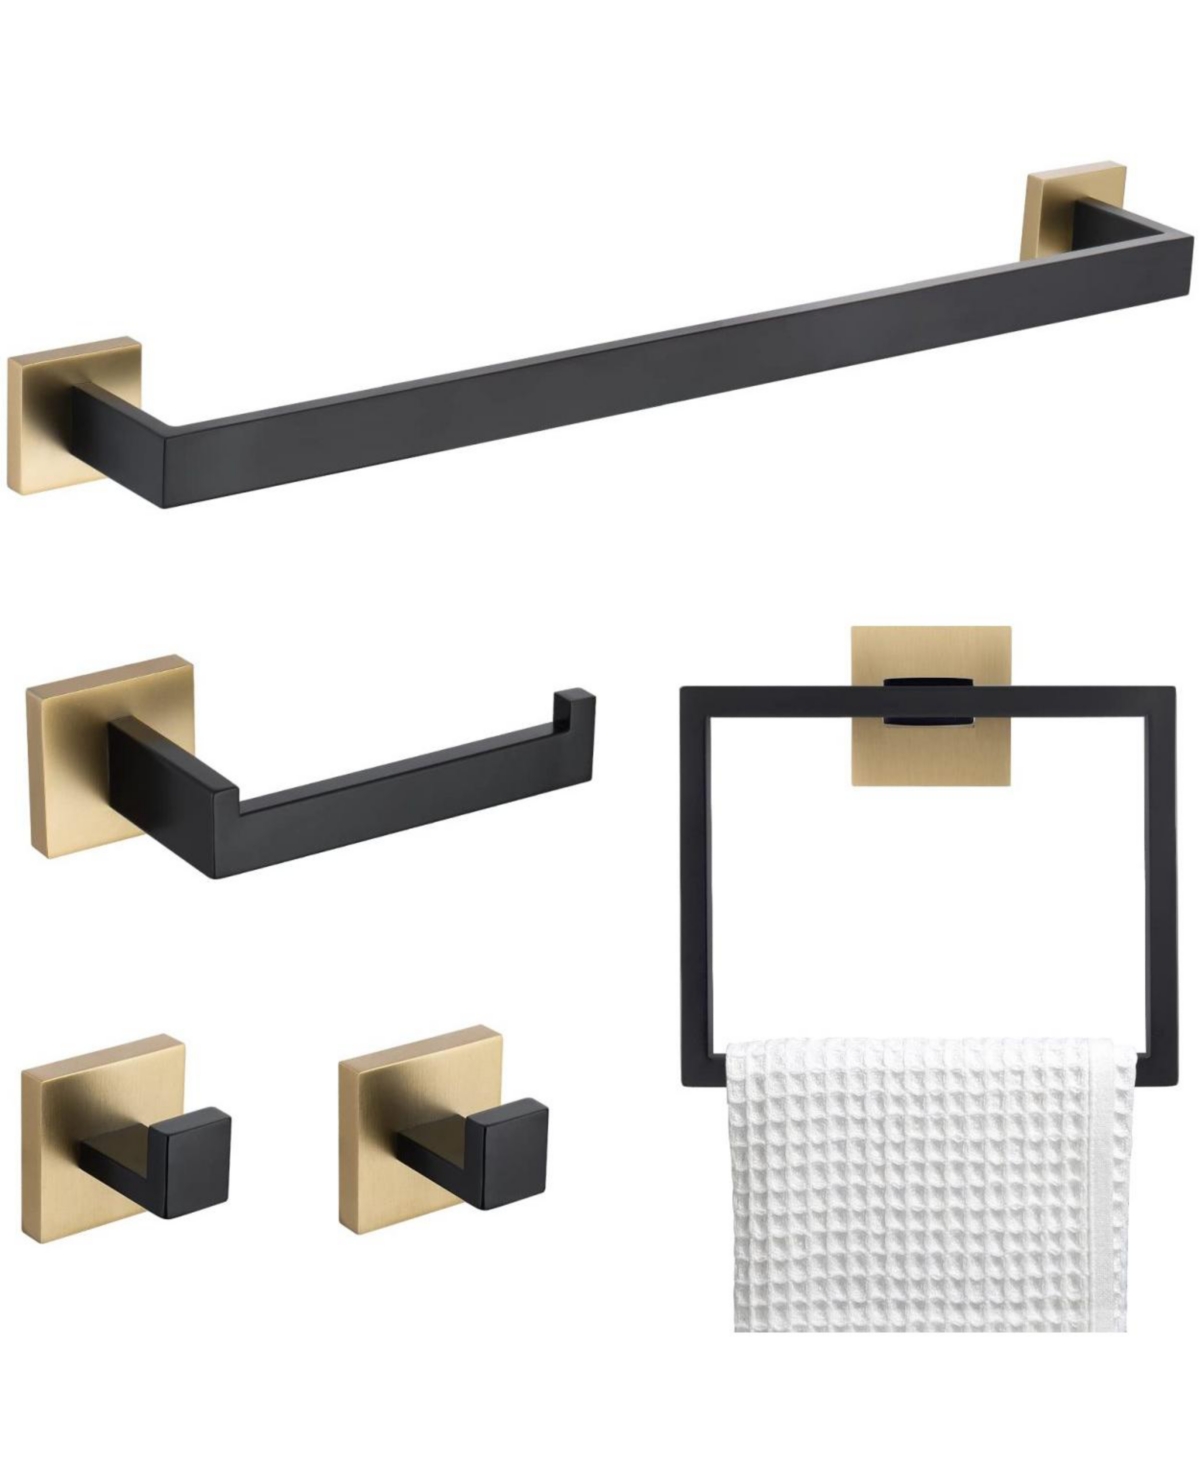 5 Pieces Bathroom Hardware Accessories Set Towel Bar Set Wall Mounted, Stainless Steel - Gold